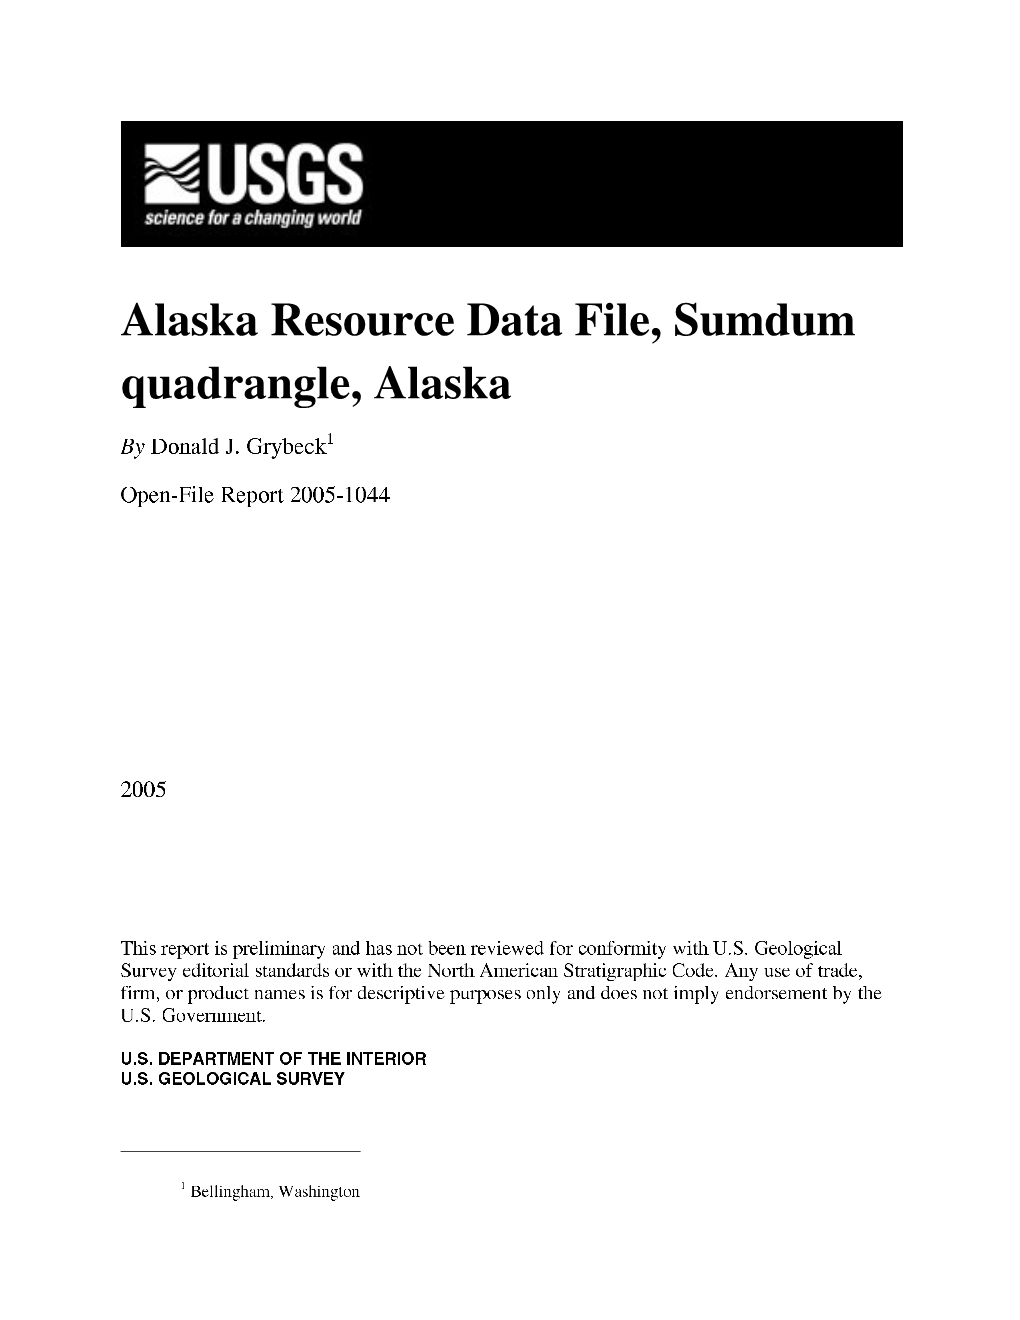 Alaska Resource Data File on Mines, Prospects and Mineral Occurrences Throughout Alaska